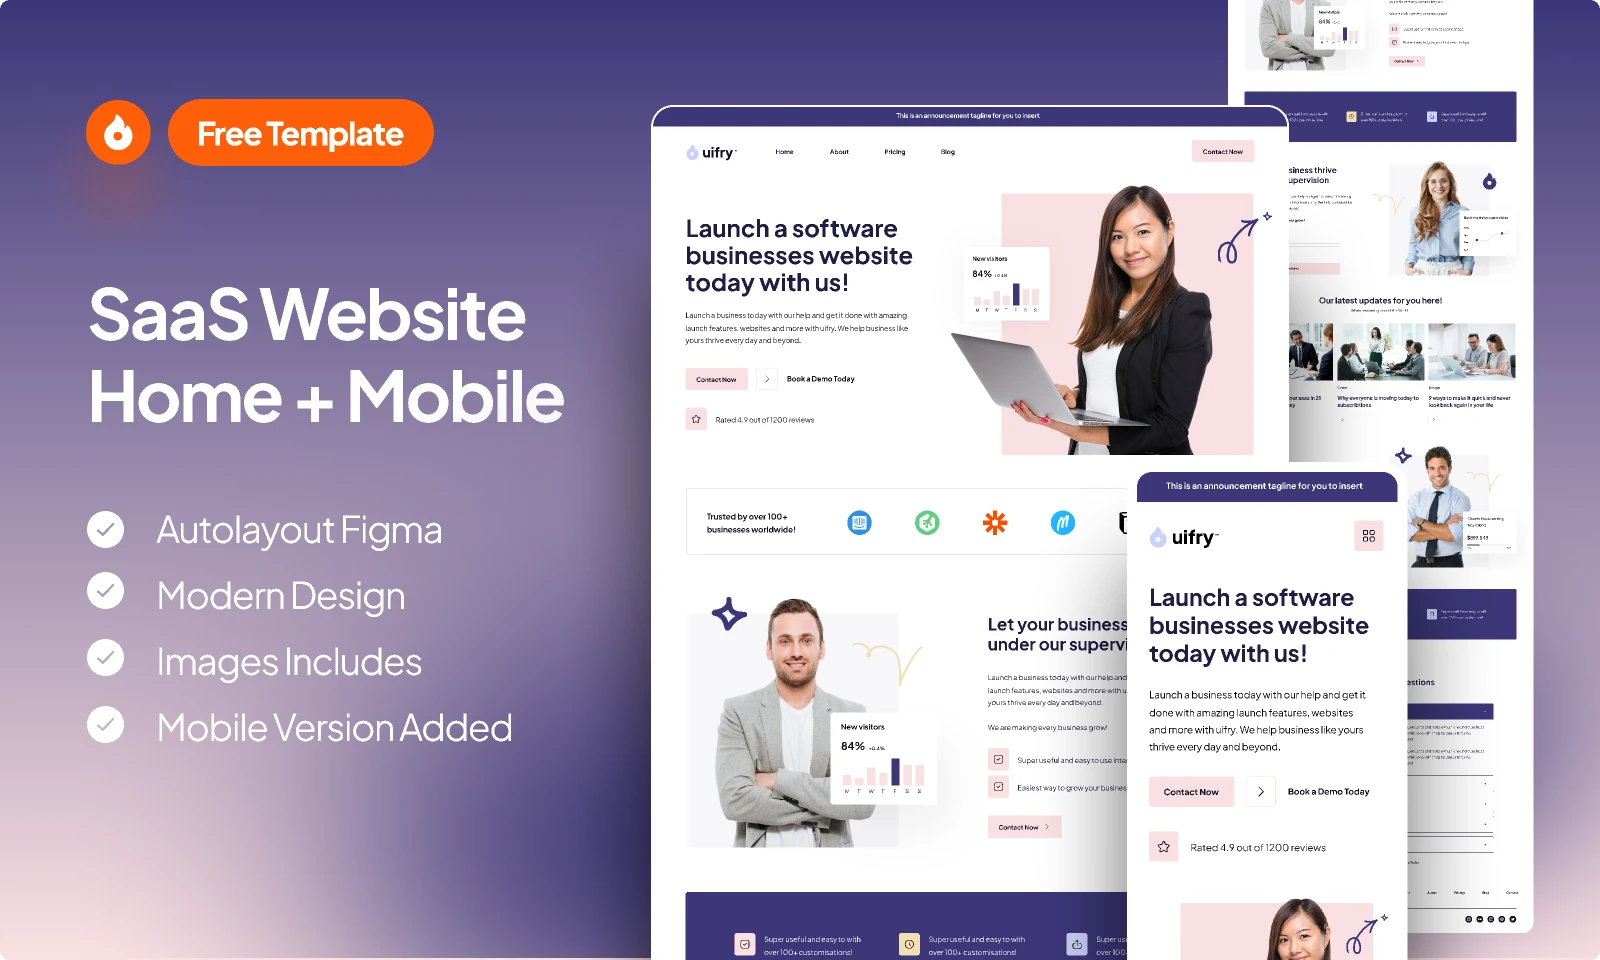 SaaS Website Home & Mobile Page for Figma and Adobe XD